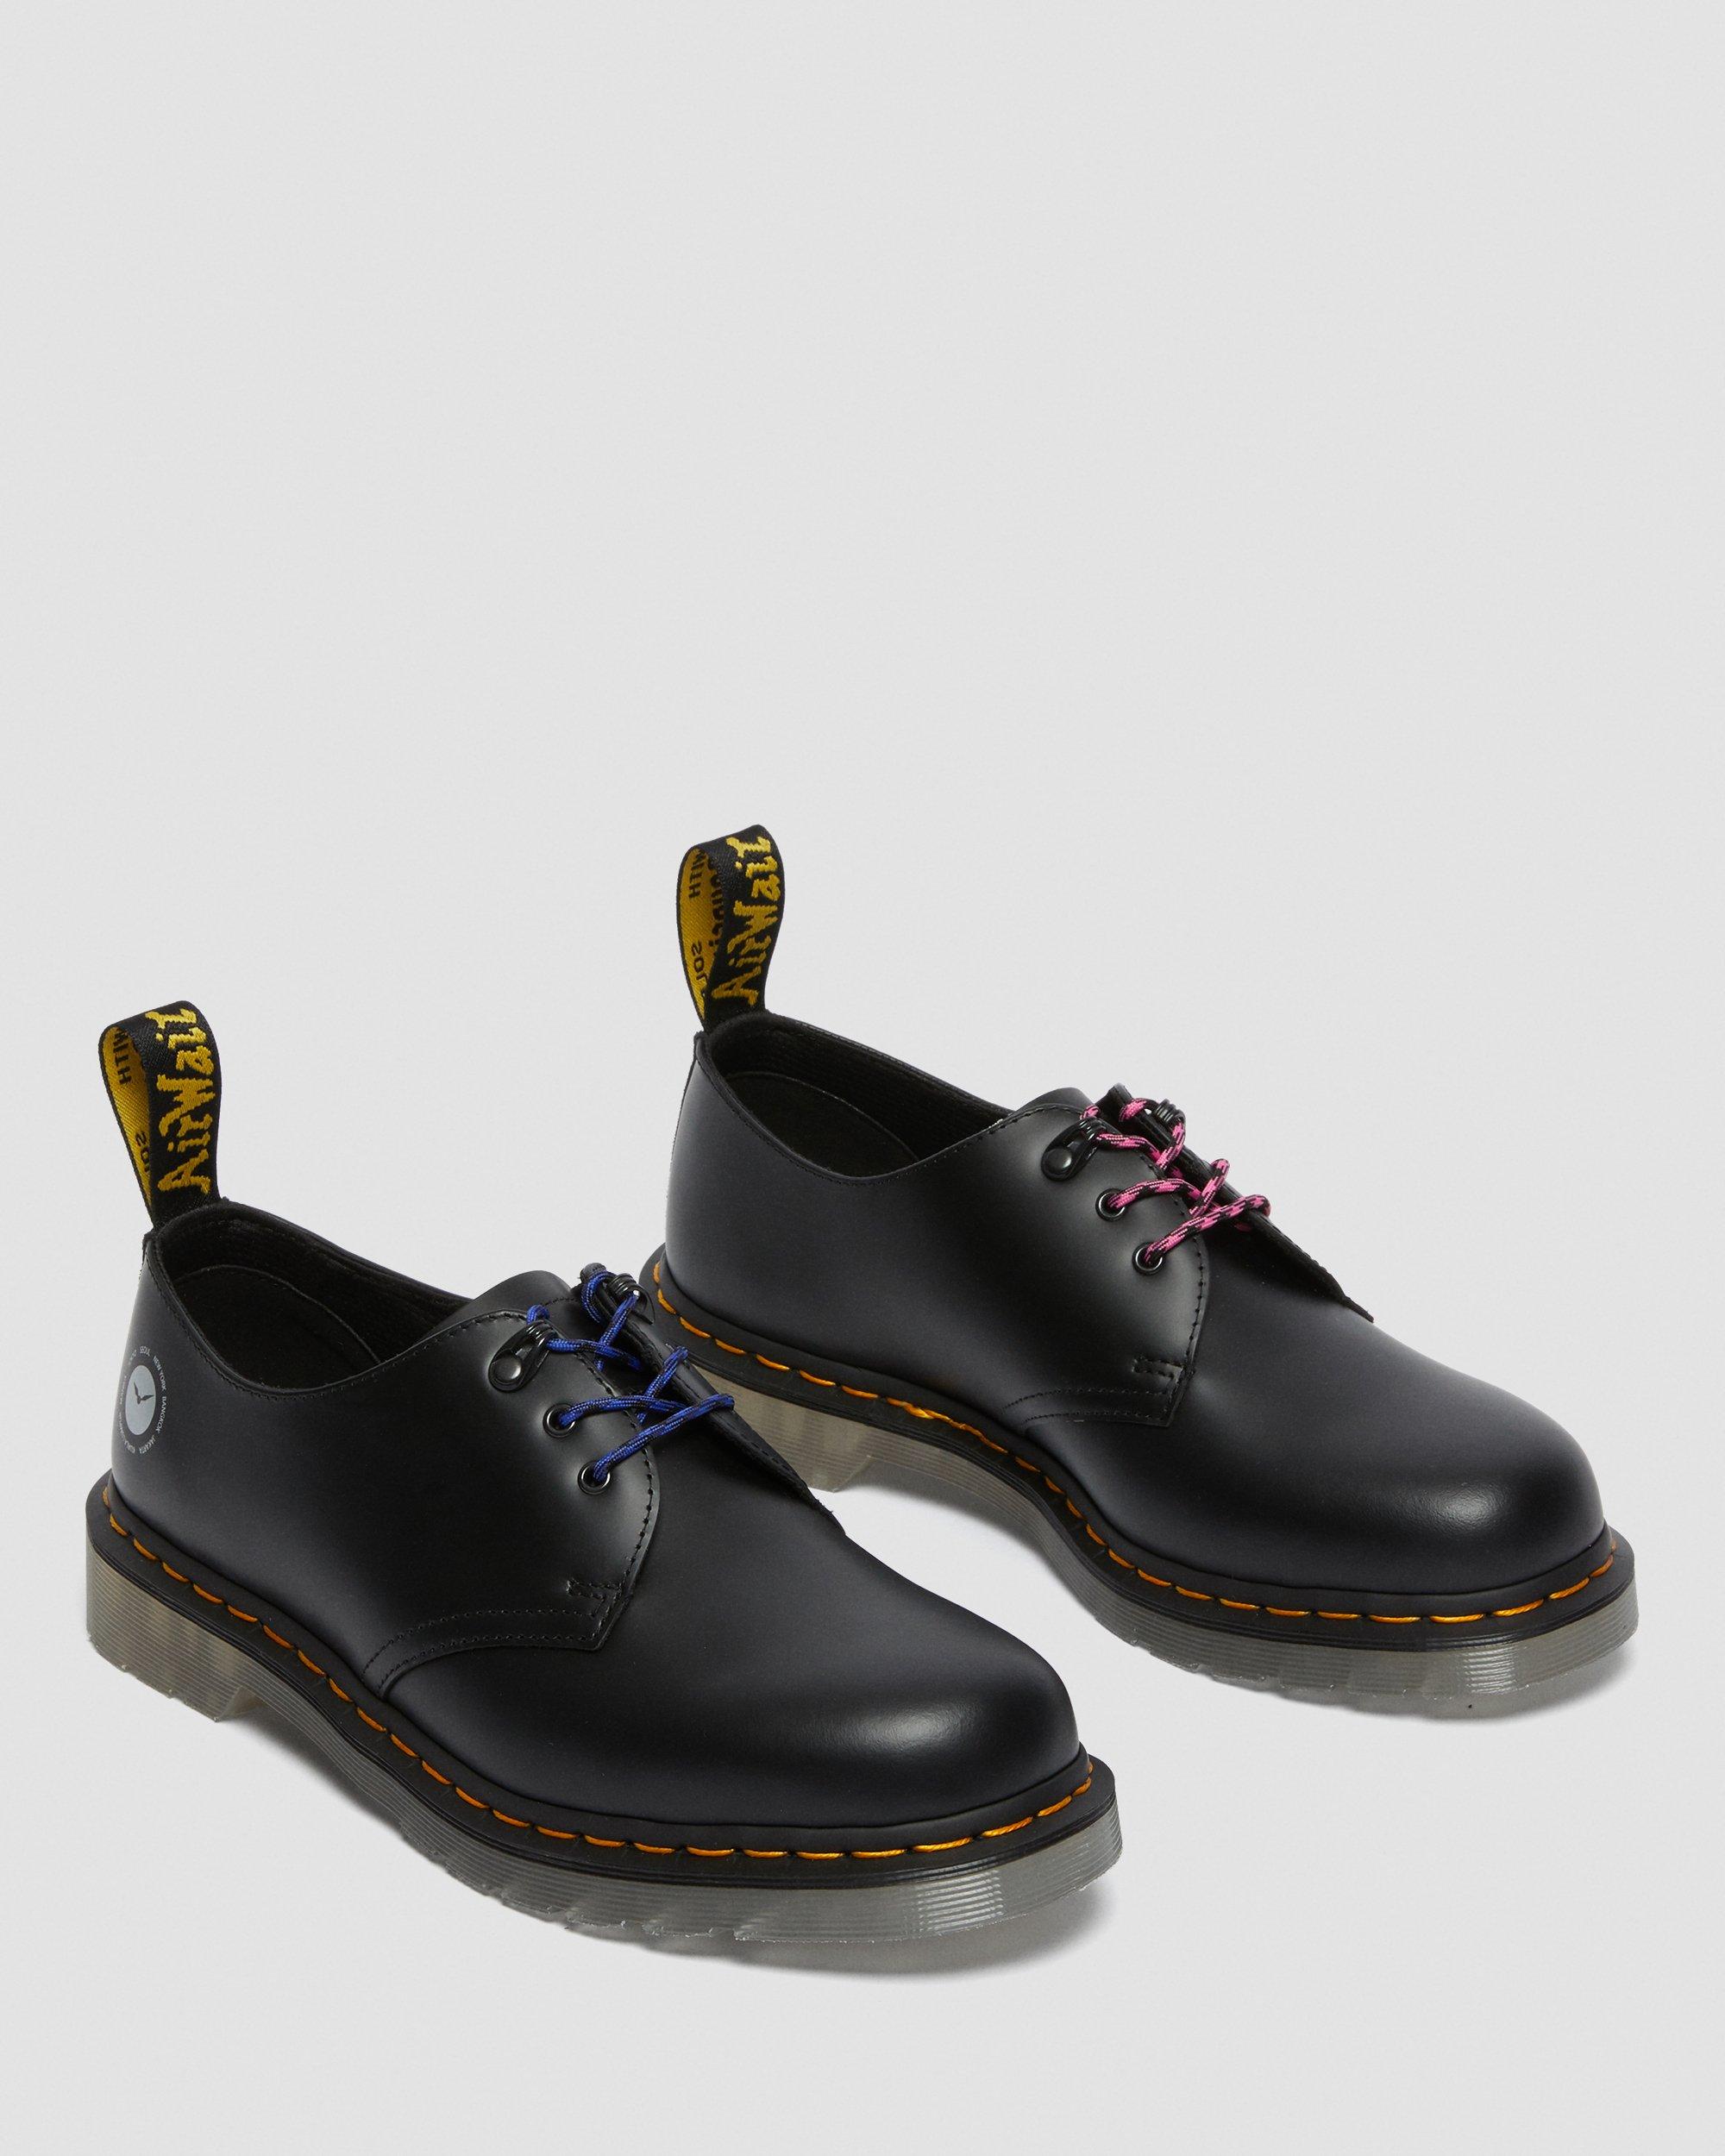 DR MARTENS 1461 Atmos Leather Oxford Shoes